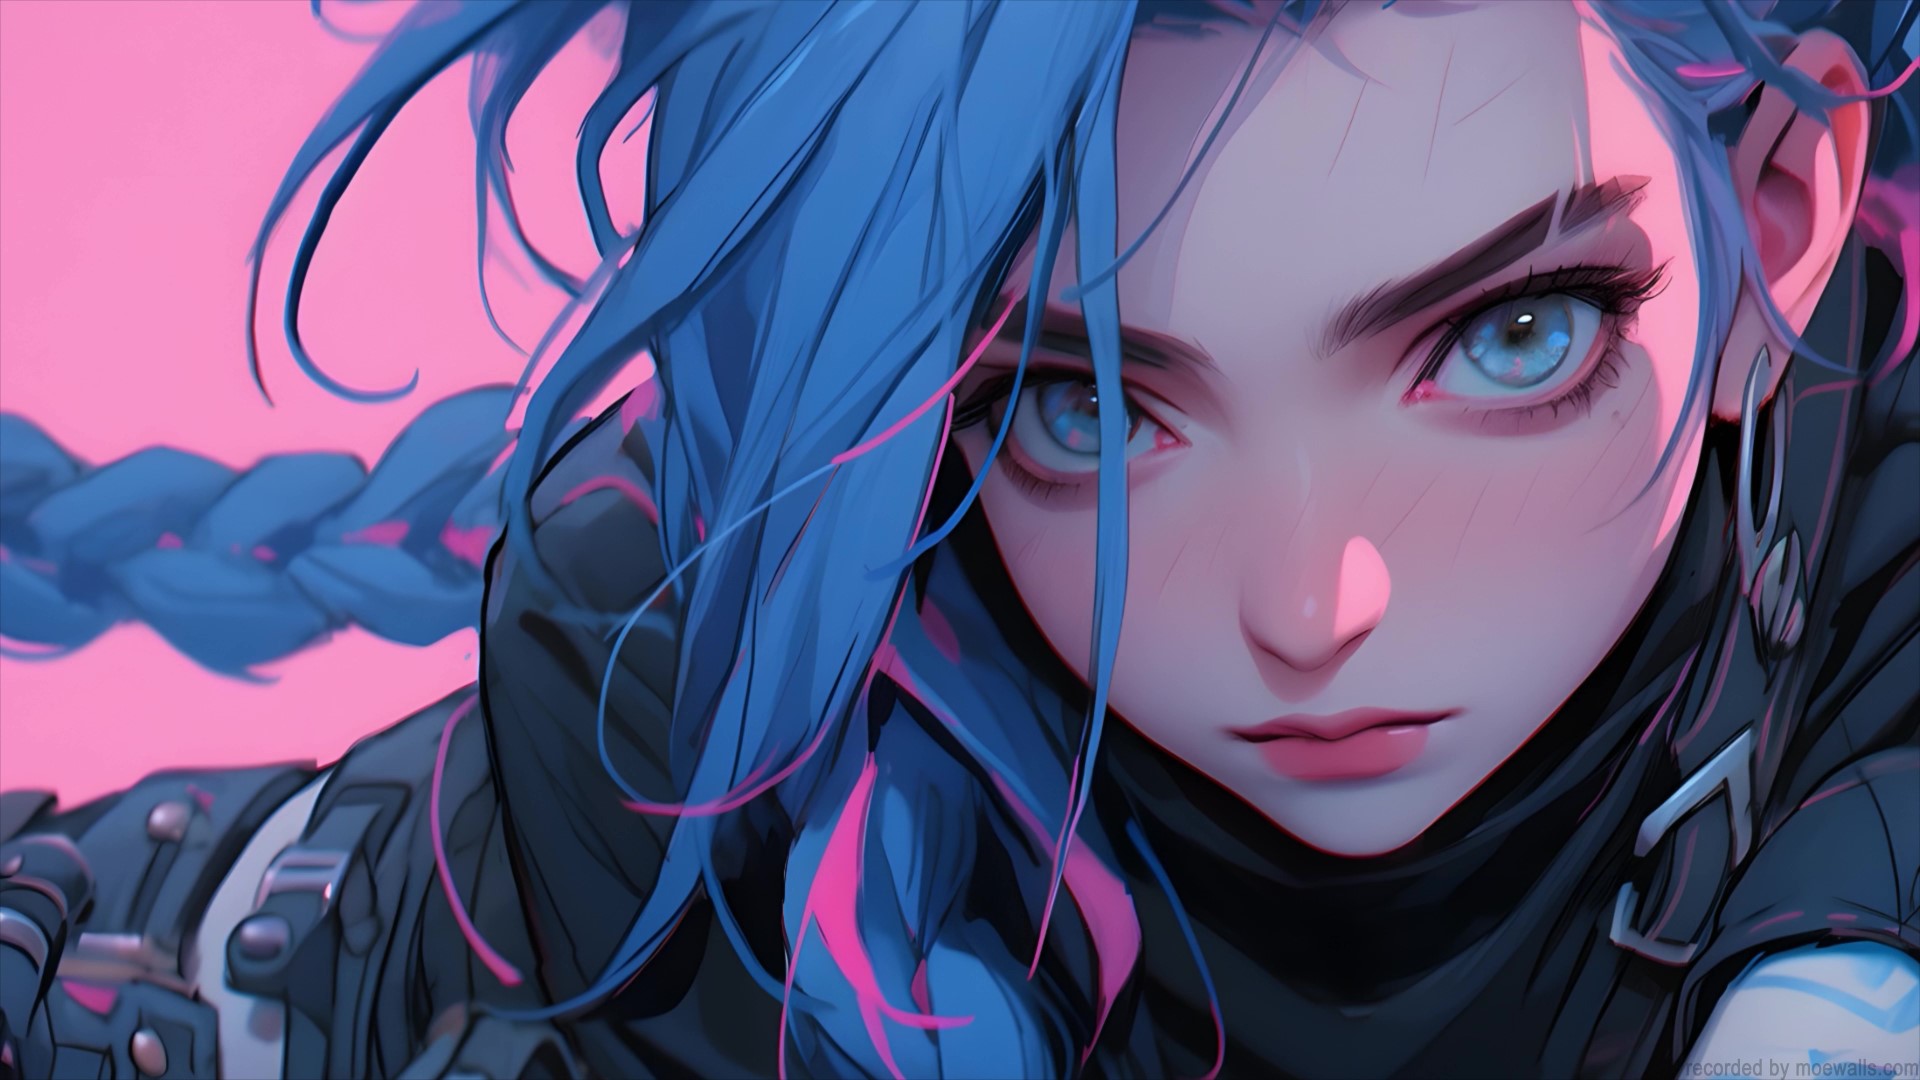 Anime poster of Jinx from League of Legends by GiveMeNine on DeviantArt